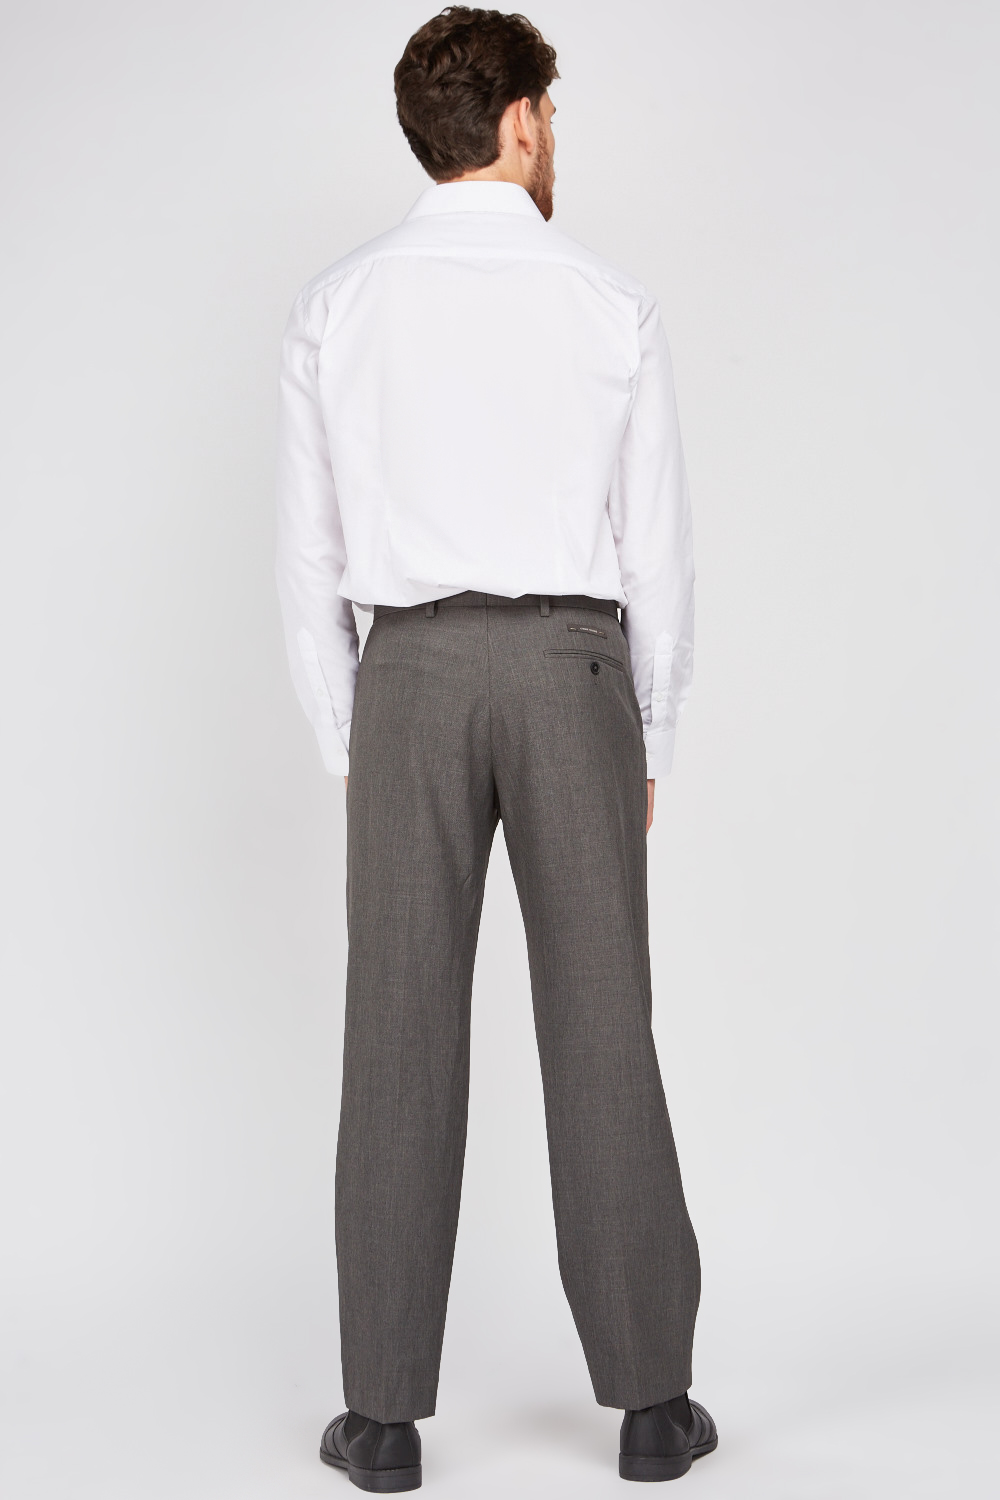 Grey Straight Cut Tailored Trousers - Just $7